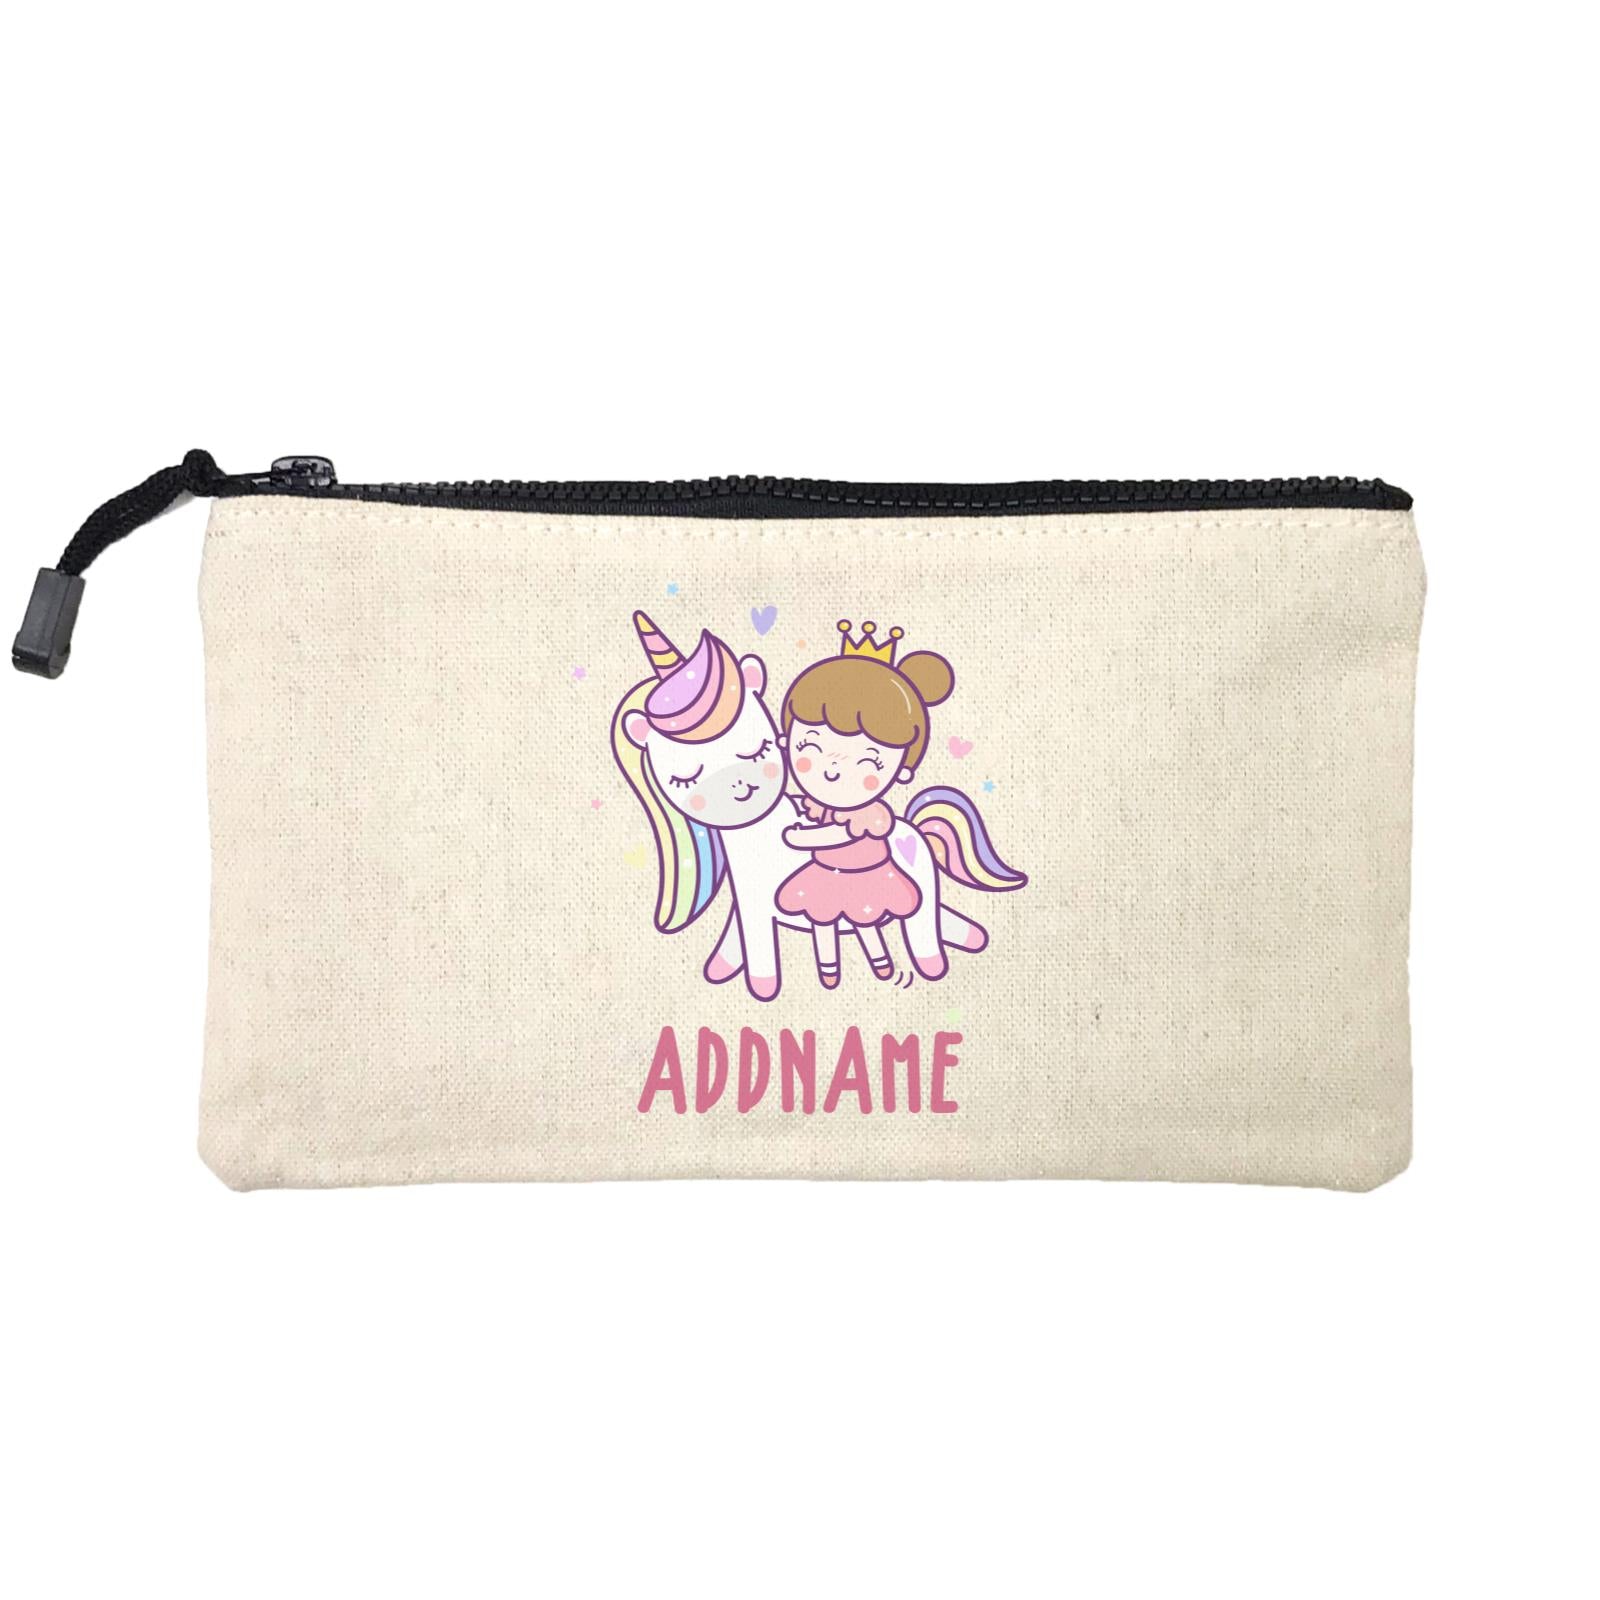 Unicorn And Princess Series Cute Unicorn With Princess Addname Mini Accessories Stationery Pouch